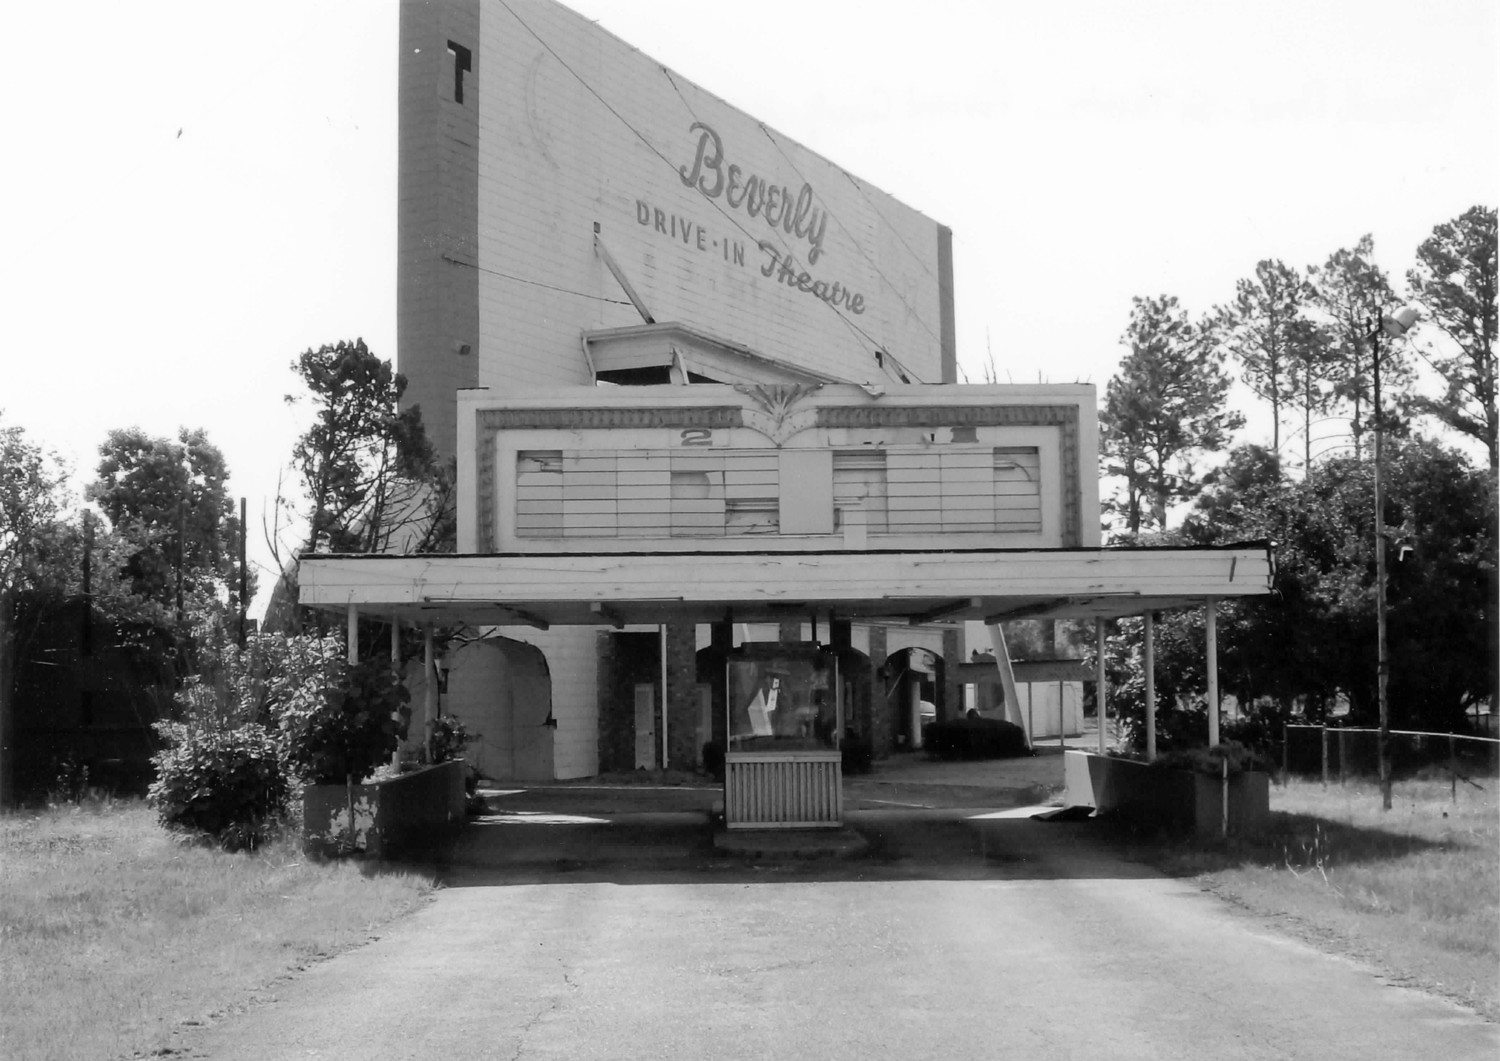 Beverly Drive-In Theatre, Hattiesburg Mississippi Box office, Entrance Canopy, Screen 1, facing southeast (2007)